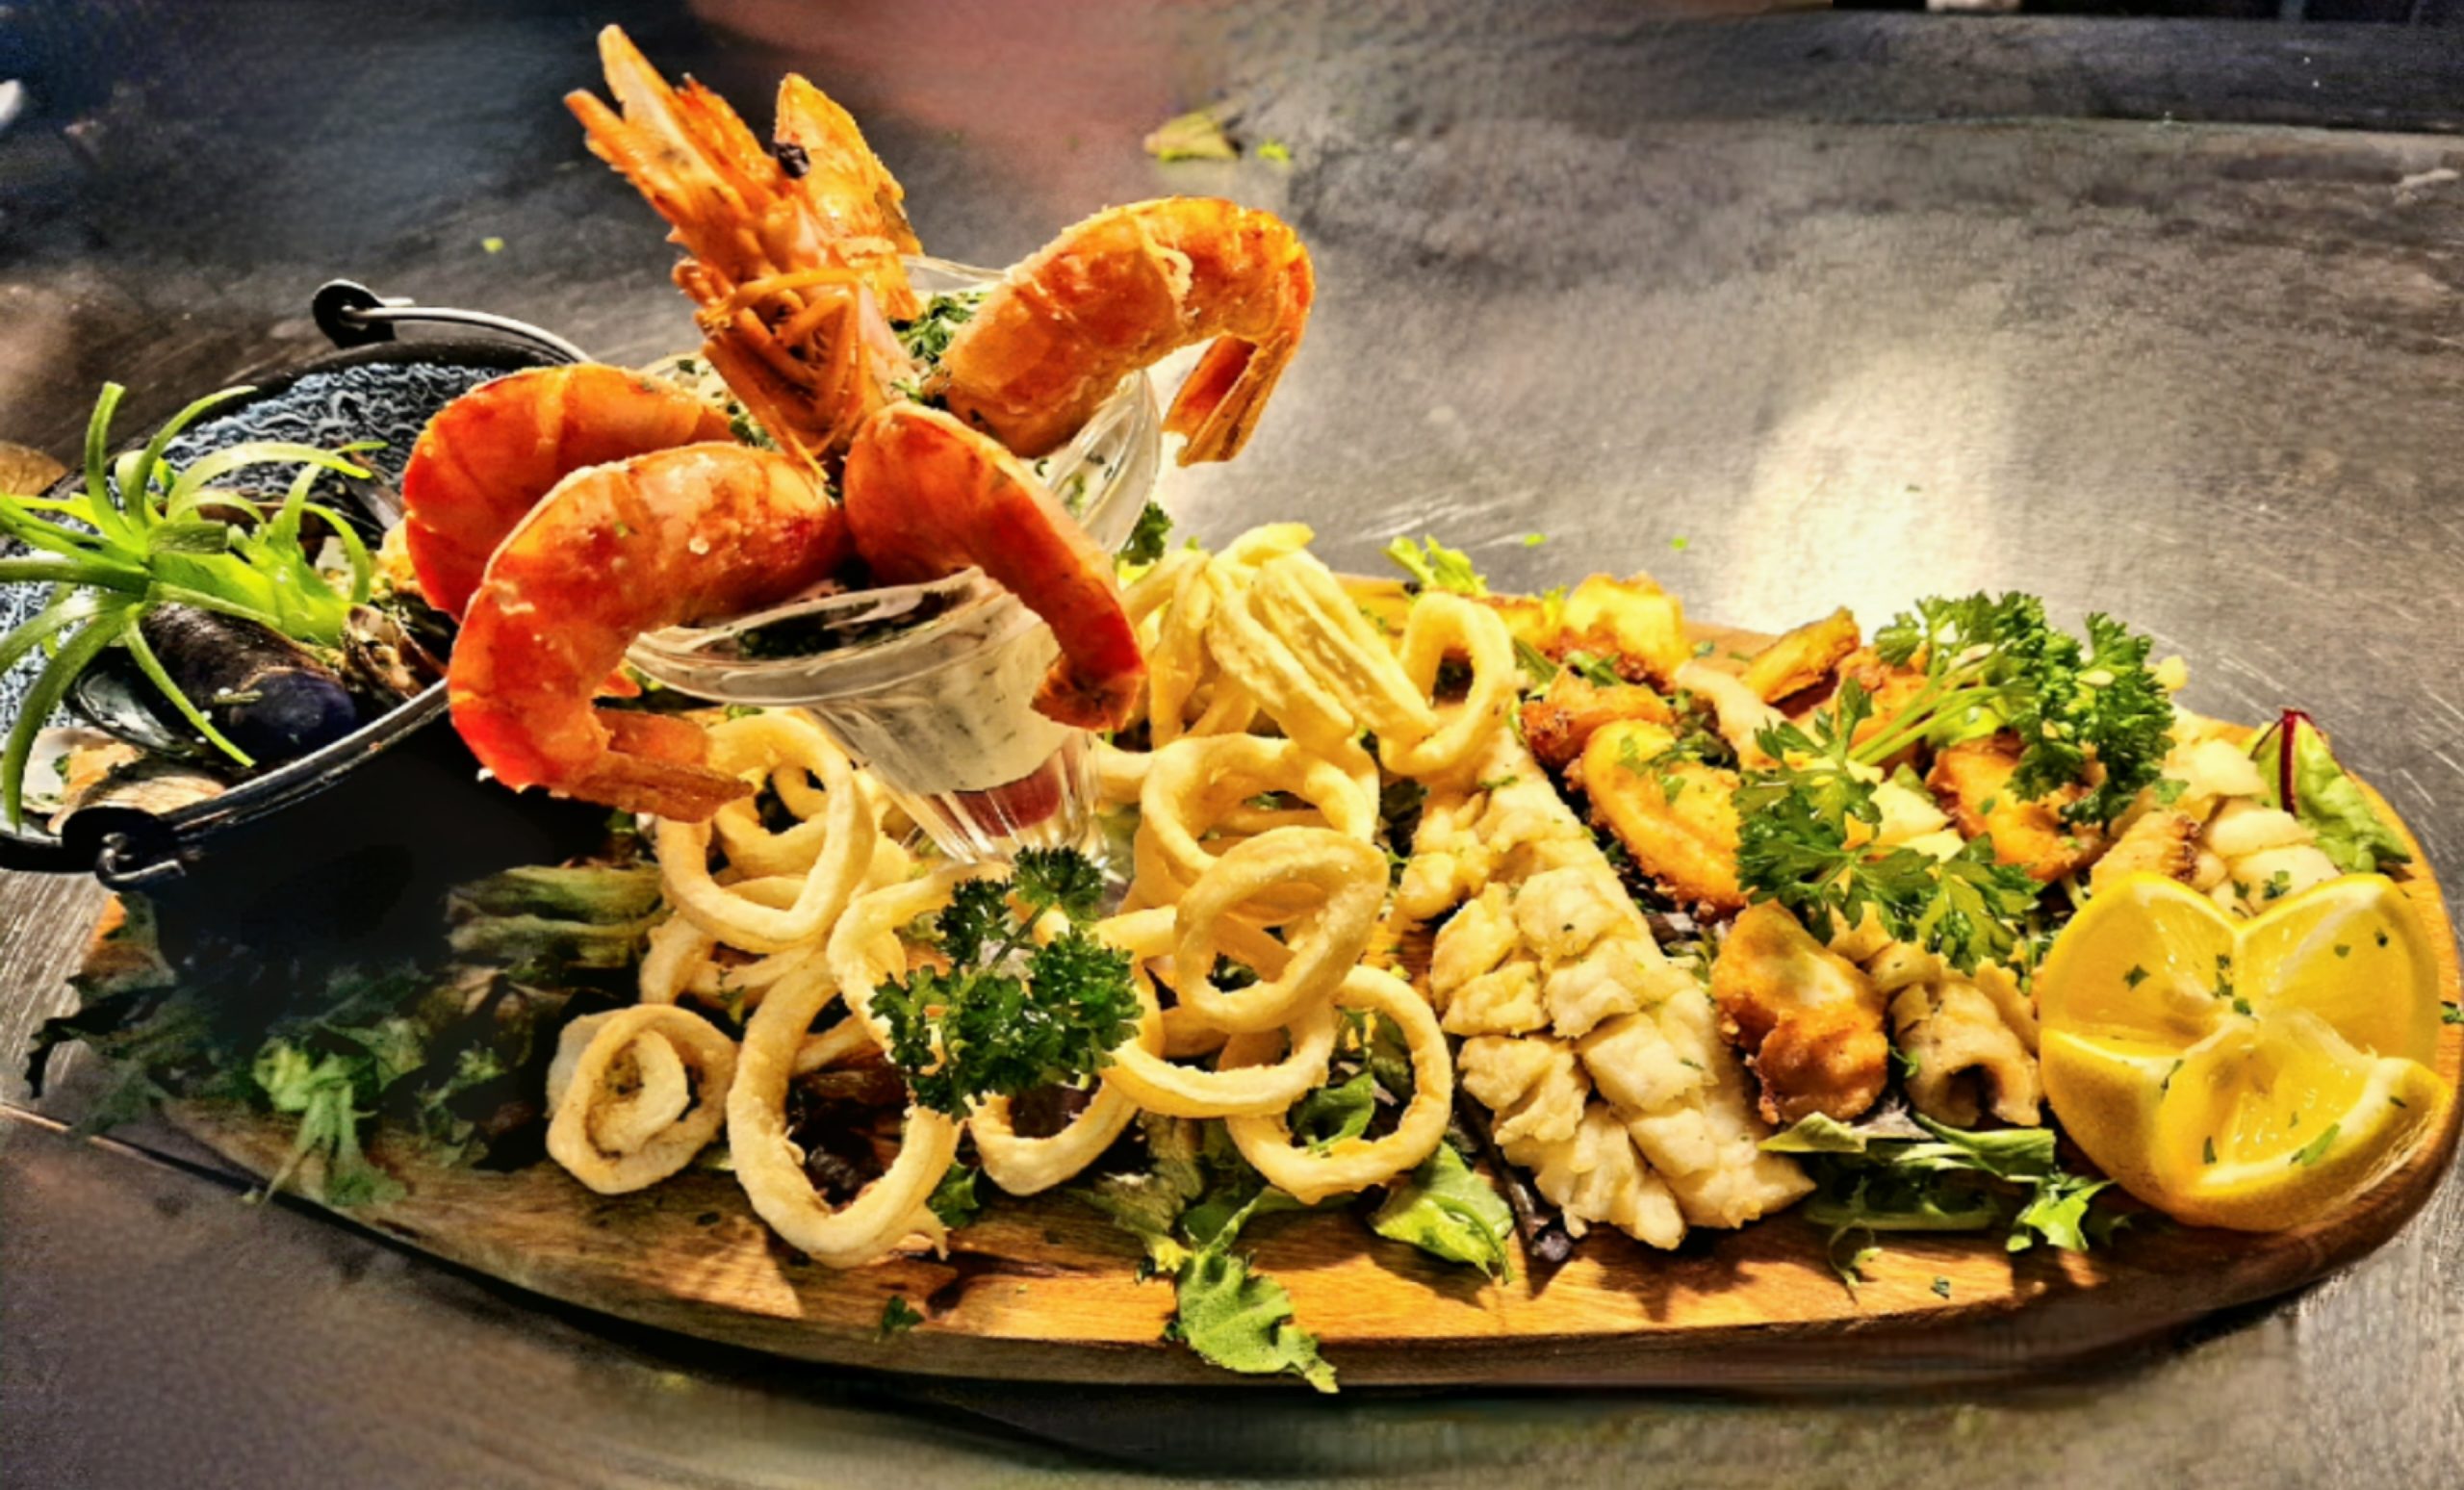 Fritto Misto for two
The catch of the day platter is a selection of fried fish and seafood - gives you a little of everything so you can savour the taste of the sea